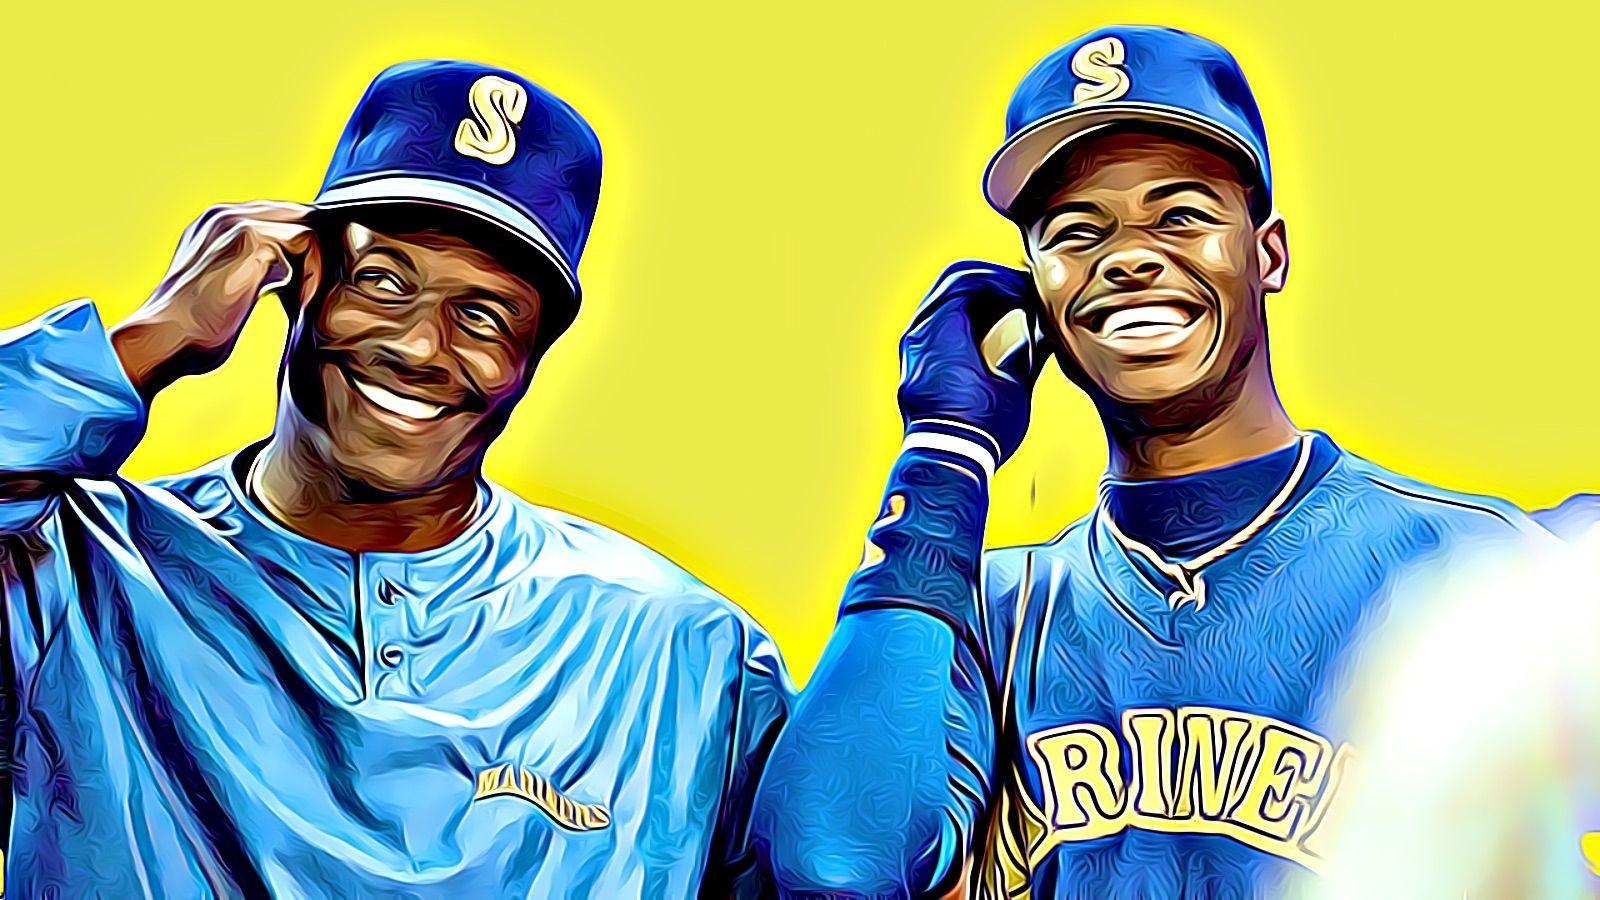 Ken Griffey Jrs sweet swing graces MLB The Show 17 cover update   Polygon